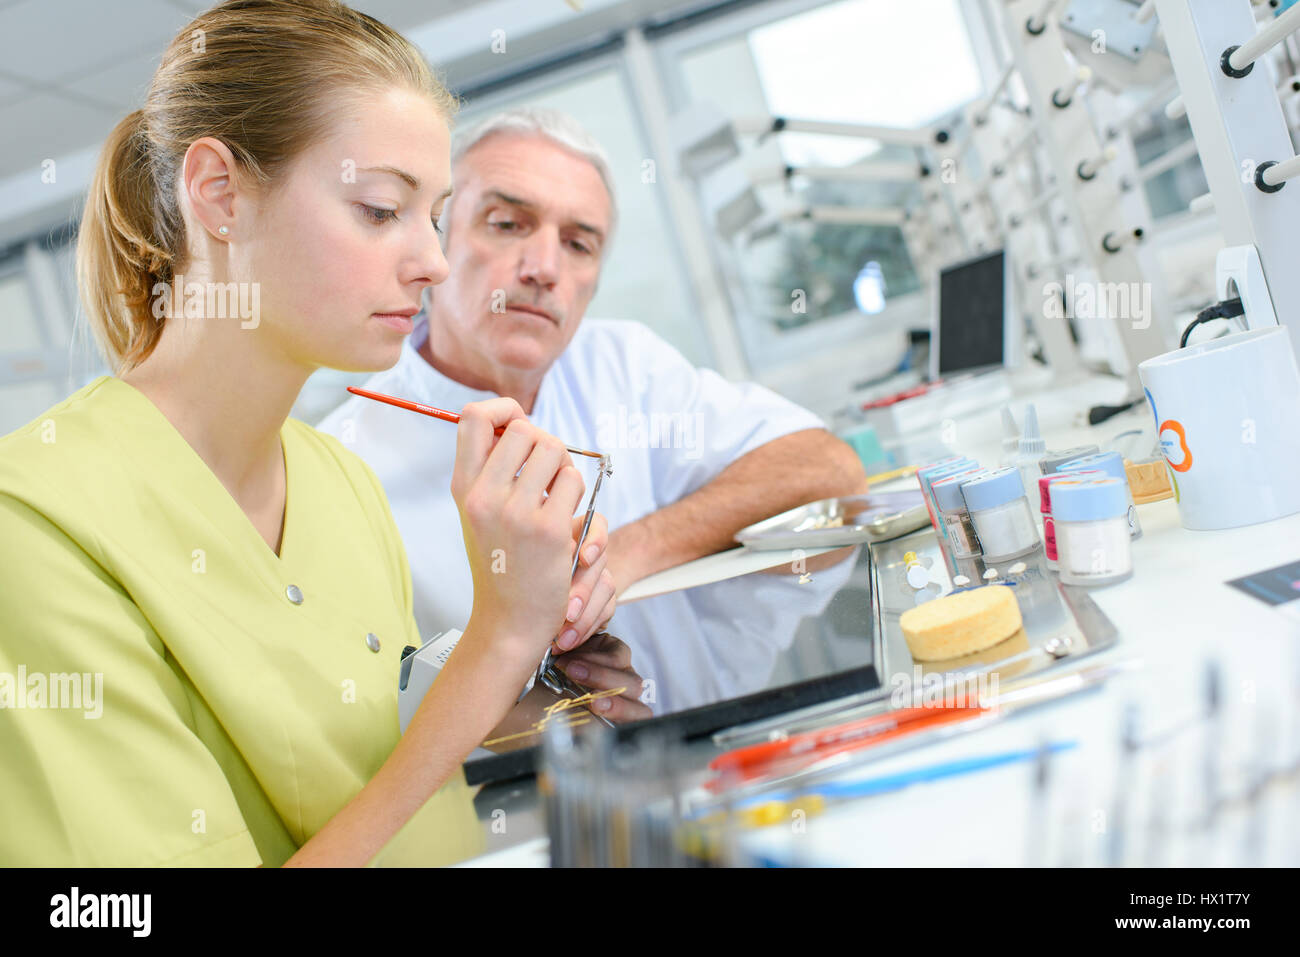 Dental assistant. Stock Photo